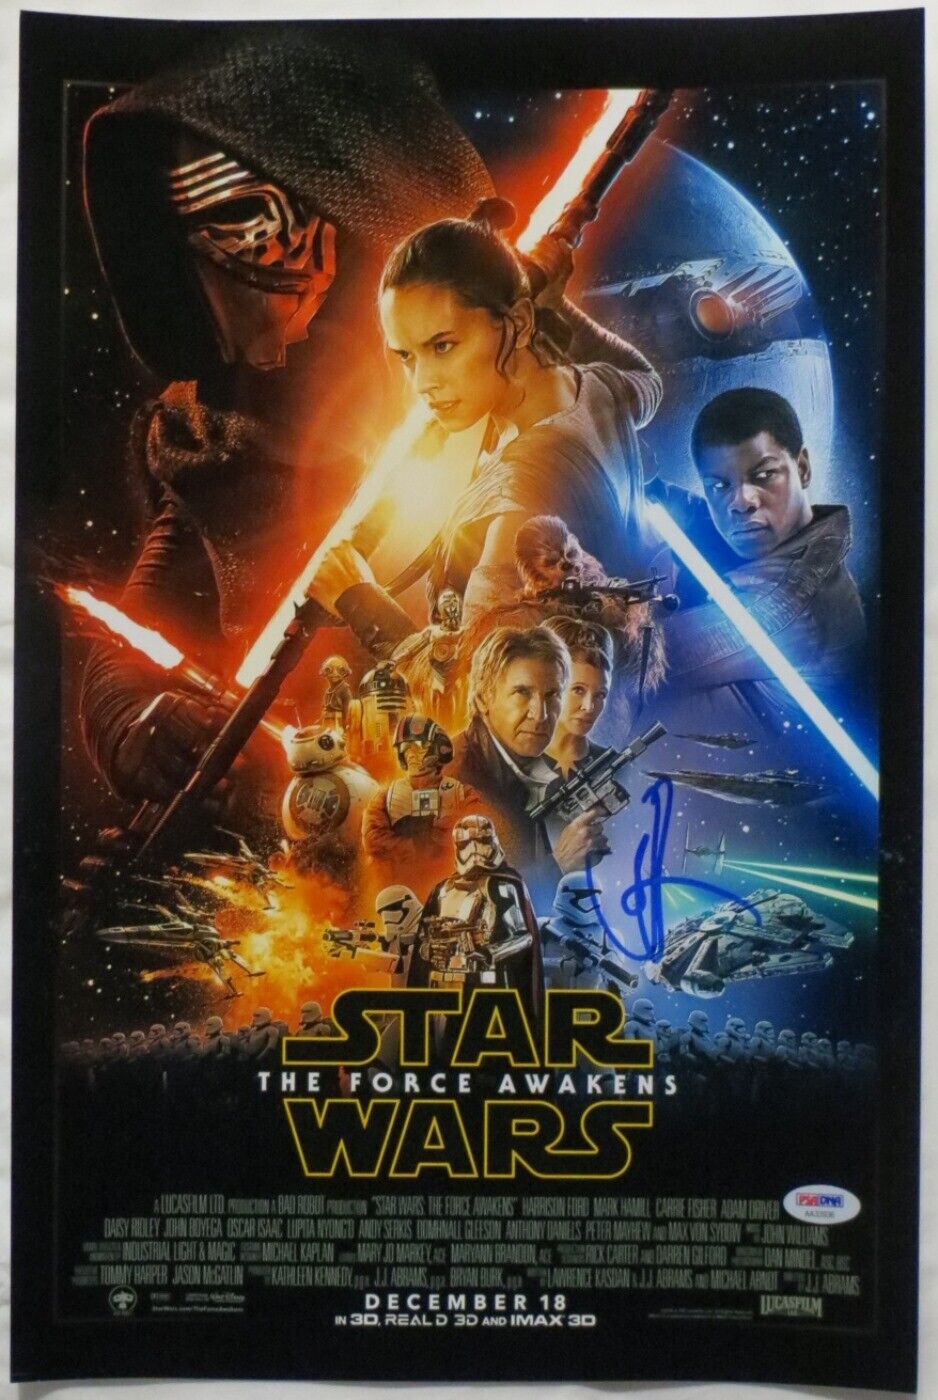 JJ Abrams Signed Star Wars Authentic Autographed 12x18 Photo Poster painting PSA/DNA #AA33936